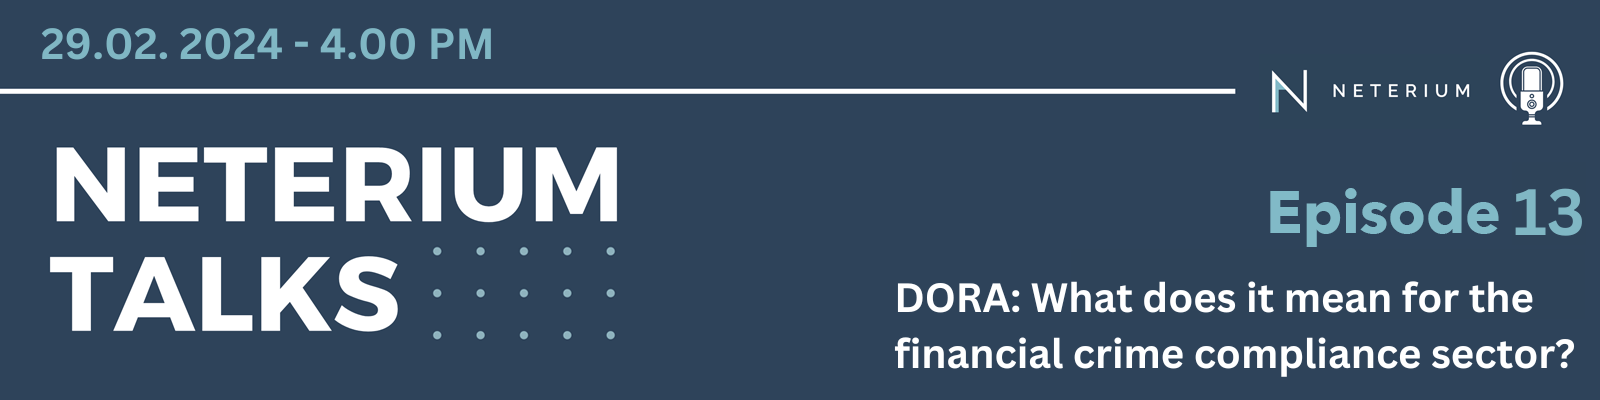 Episode 13 : DORA : What does it mean for the financial crime compliance sector?  